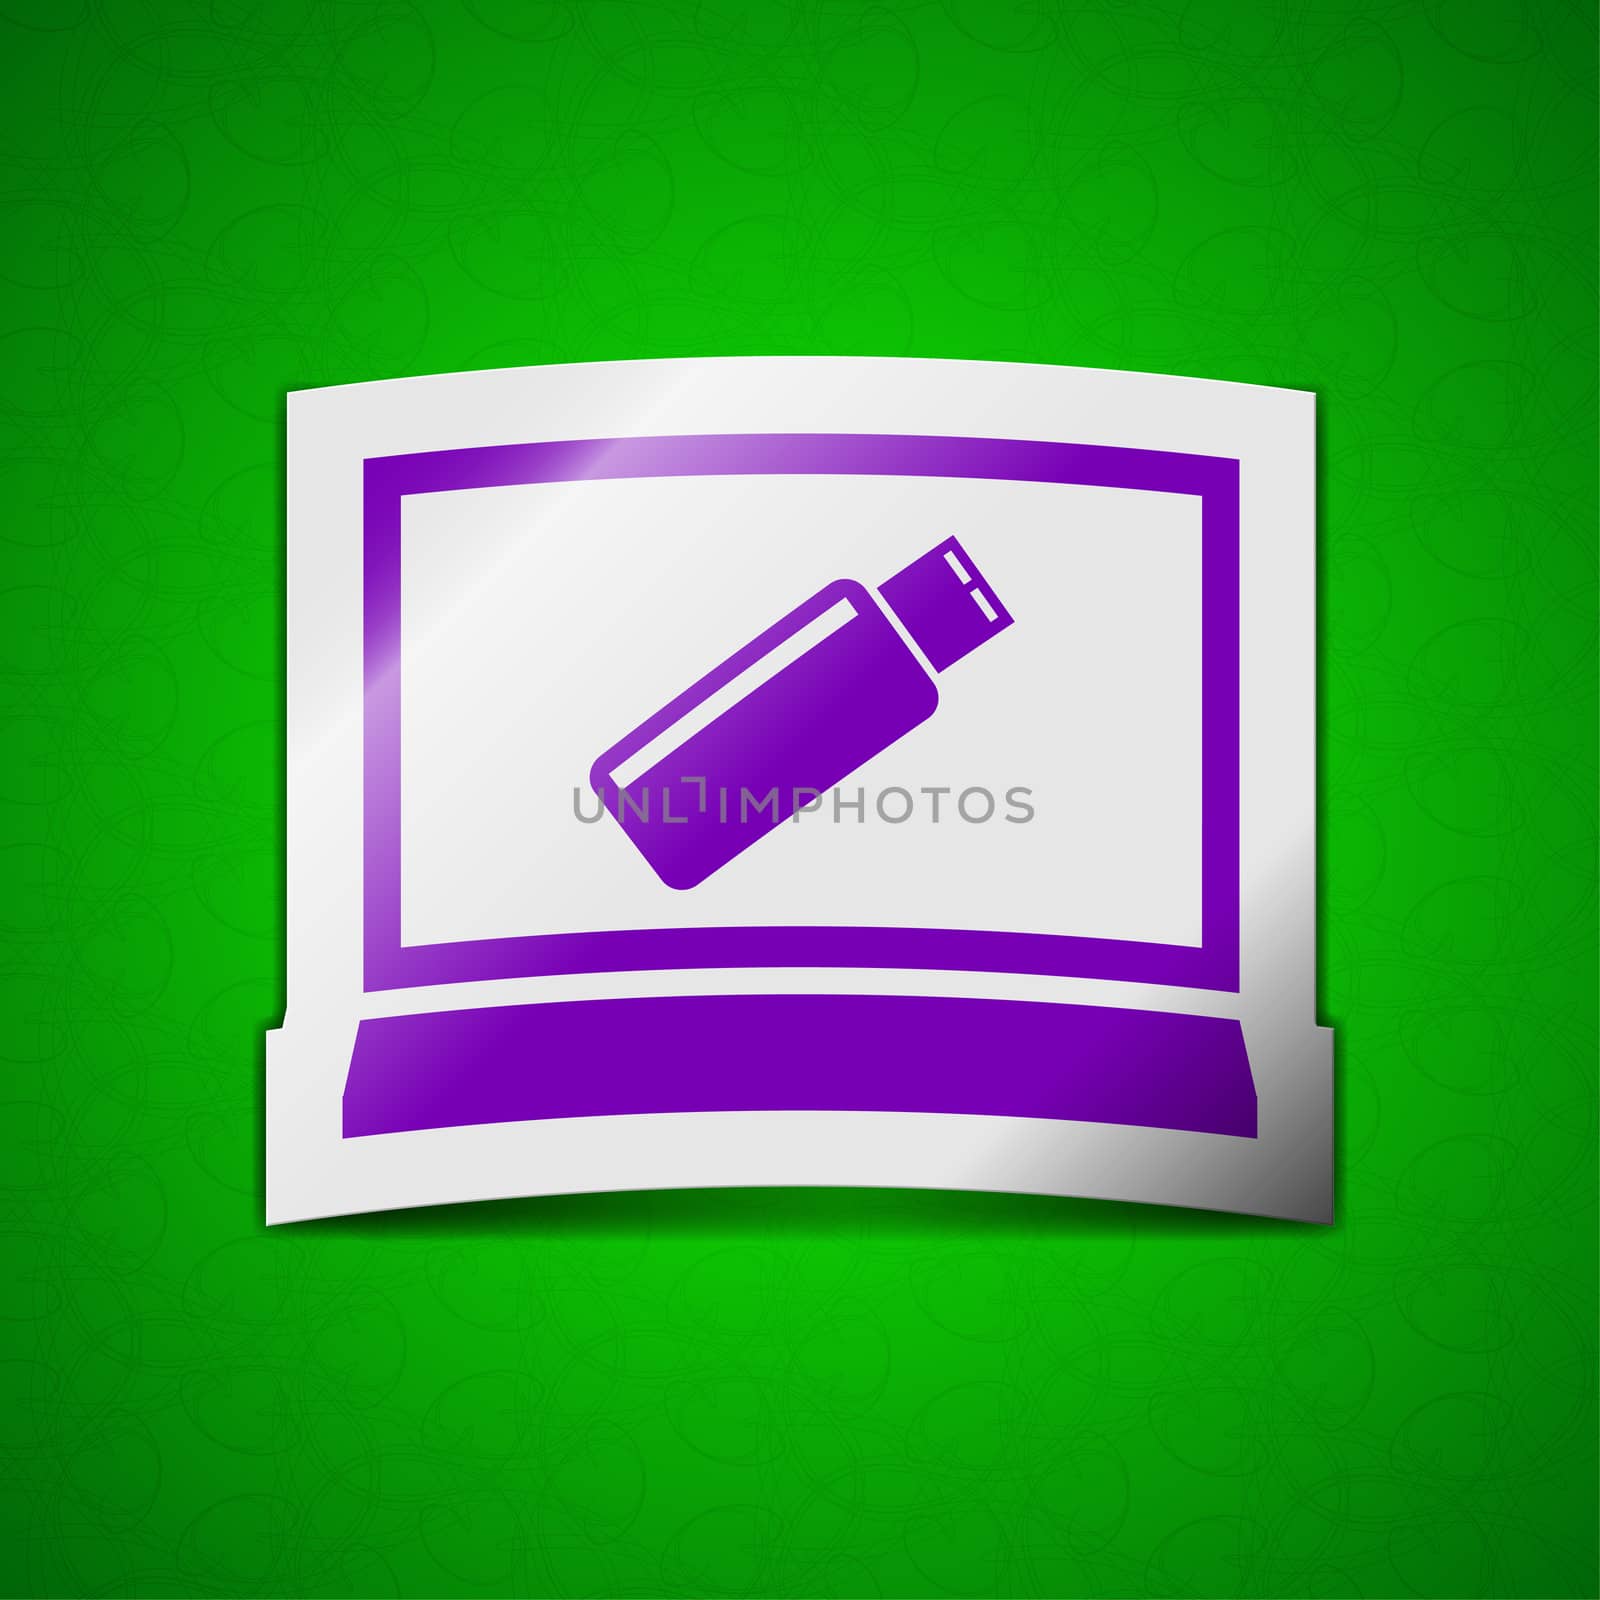 usb flash drive and monitor icon sign. Symbol chic colored sticky label on green background.  illustration